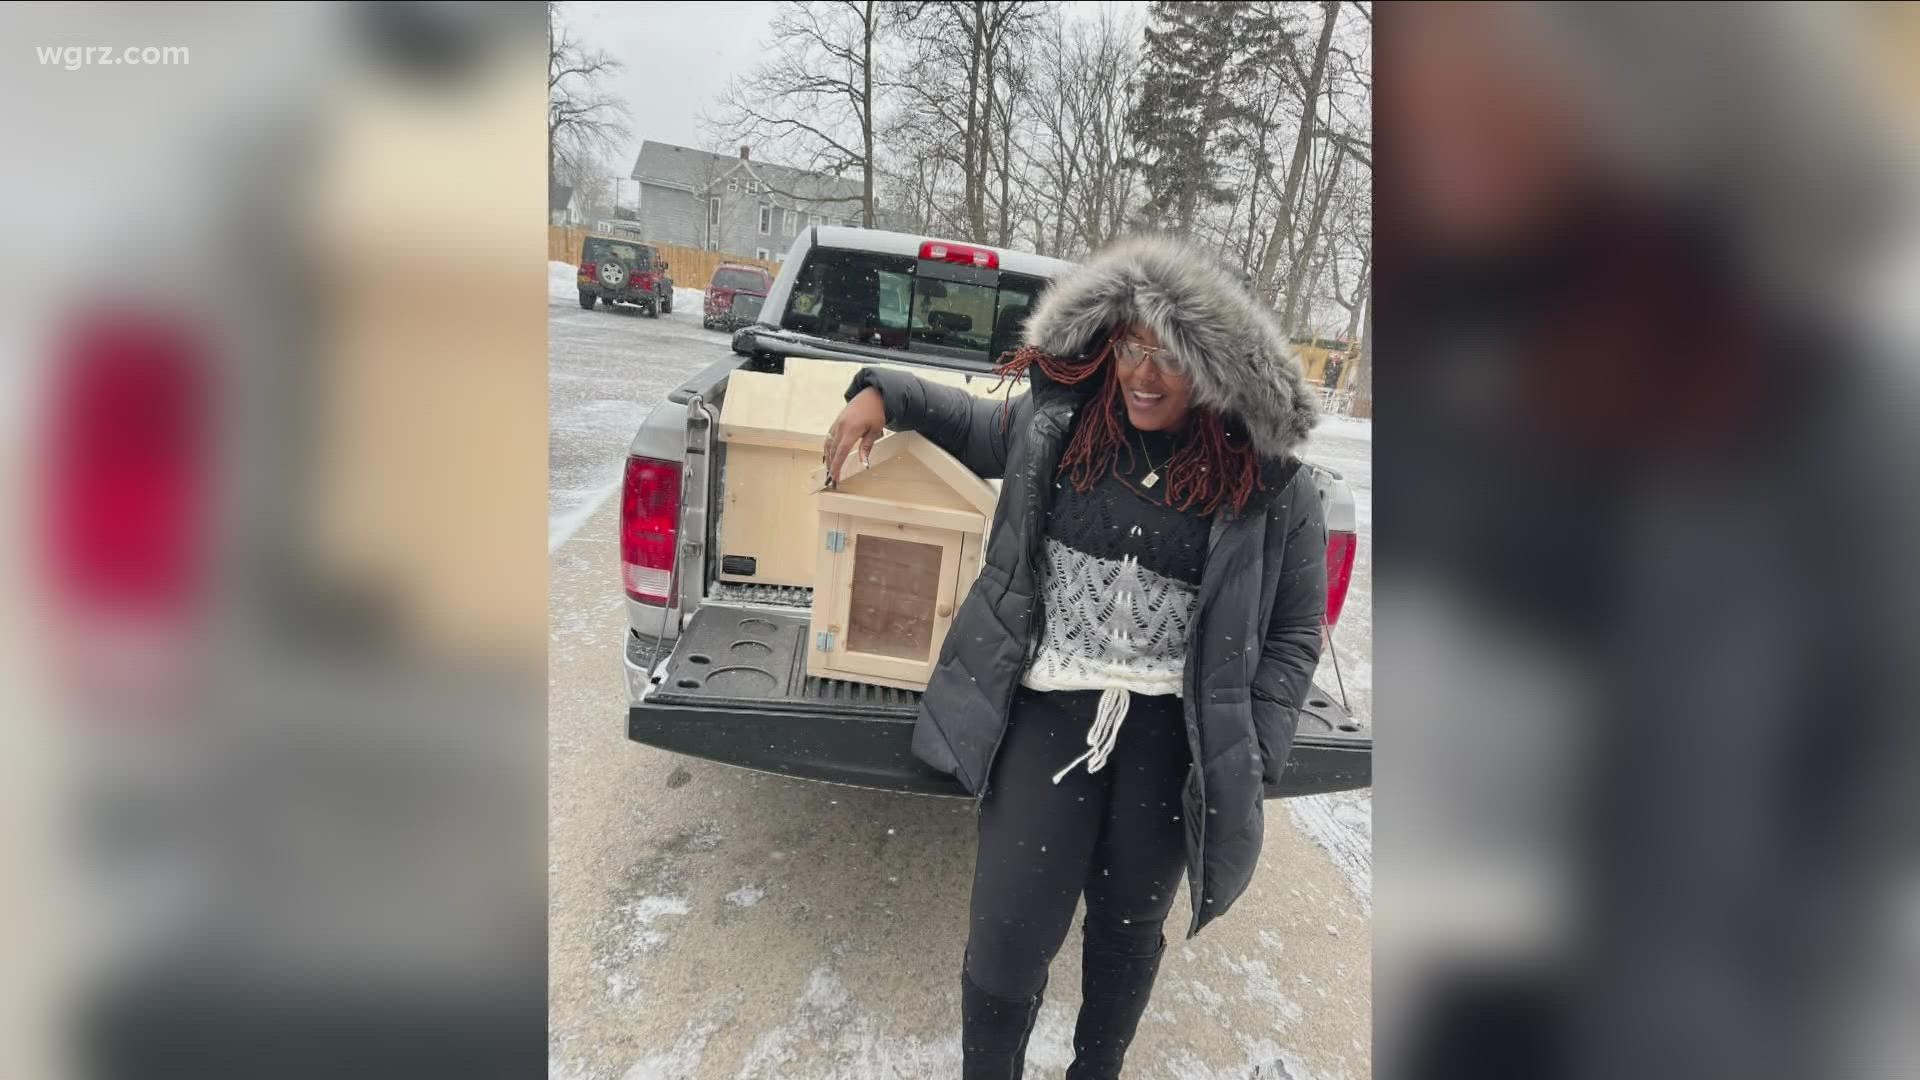 Jillian Hanesworth launches "Buffalo Books," a project that would bring little libraries to communities throughout the East Side.